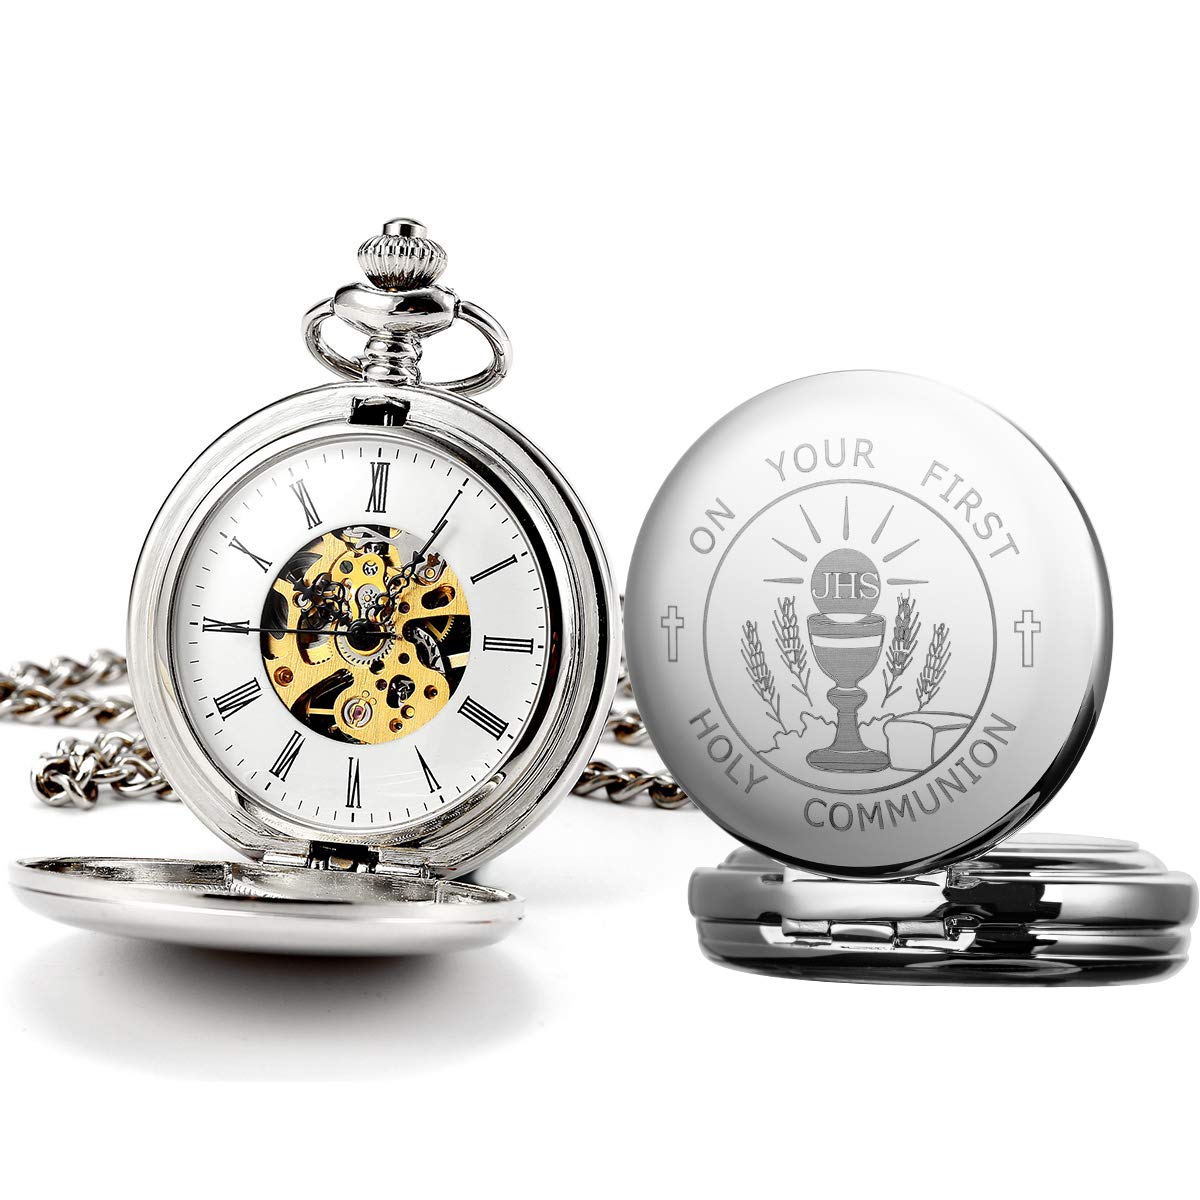 ManChDa Engraved Boy's First Holy Communion/Christening St Christopher Pewter Pocket Watch Gift with Presentation Box Mechanical Pocket Watches with Chain for Men Boy’s Confirmation Gifts(Silver)